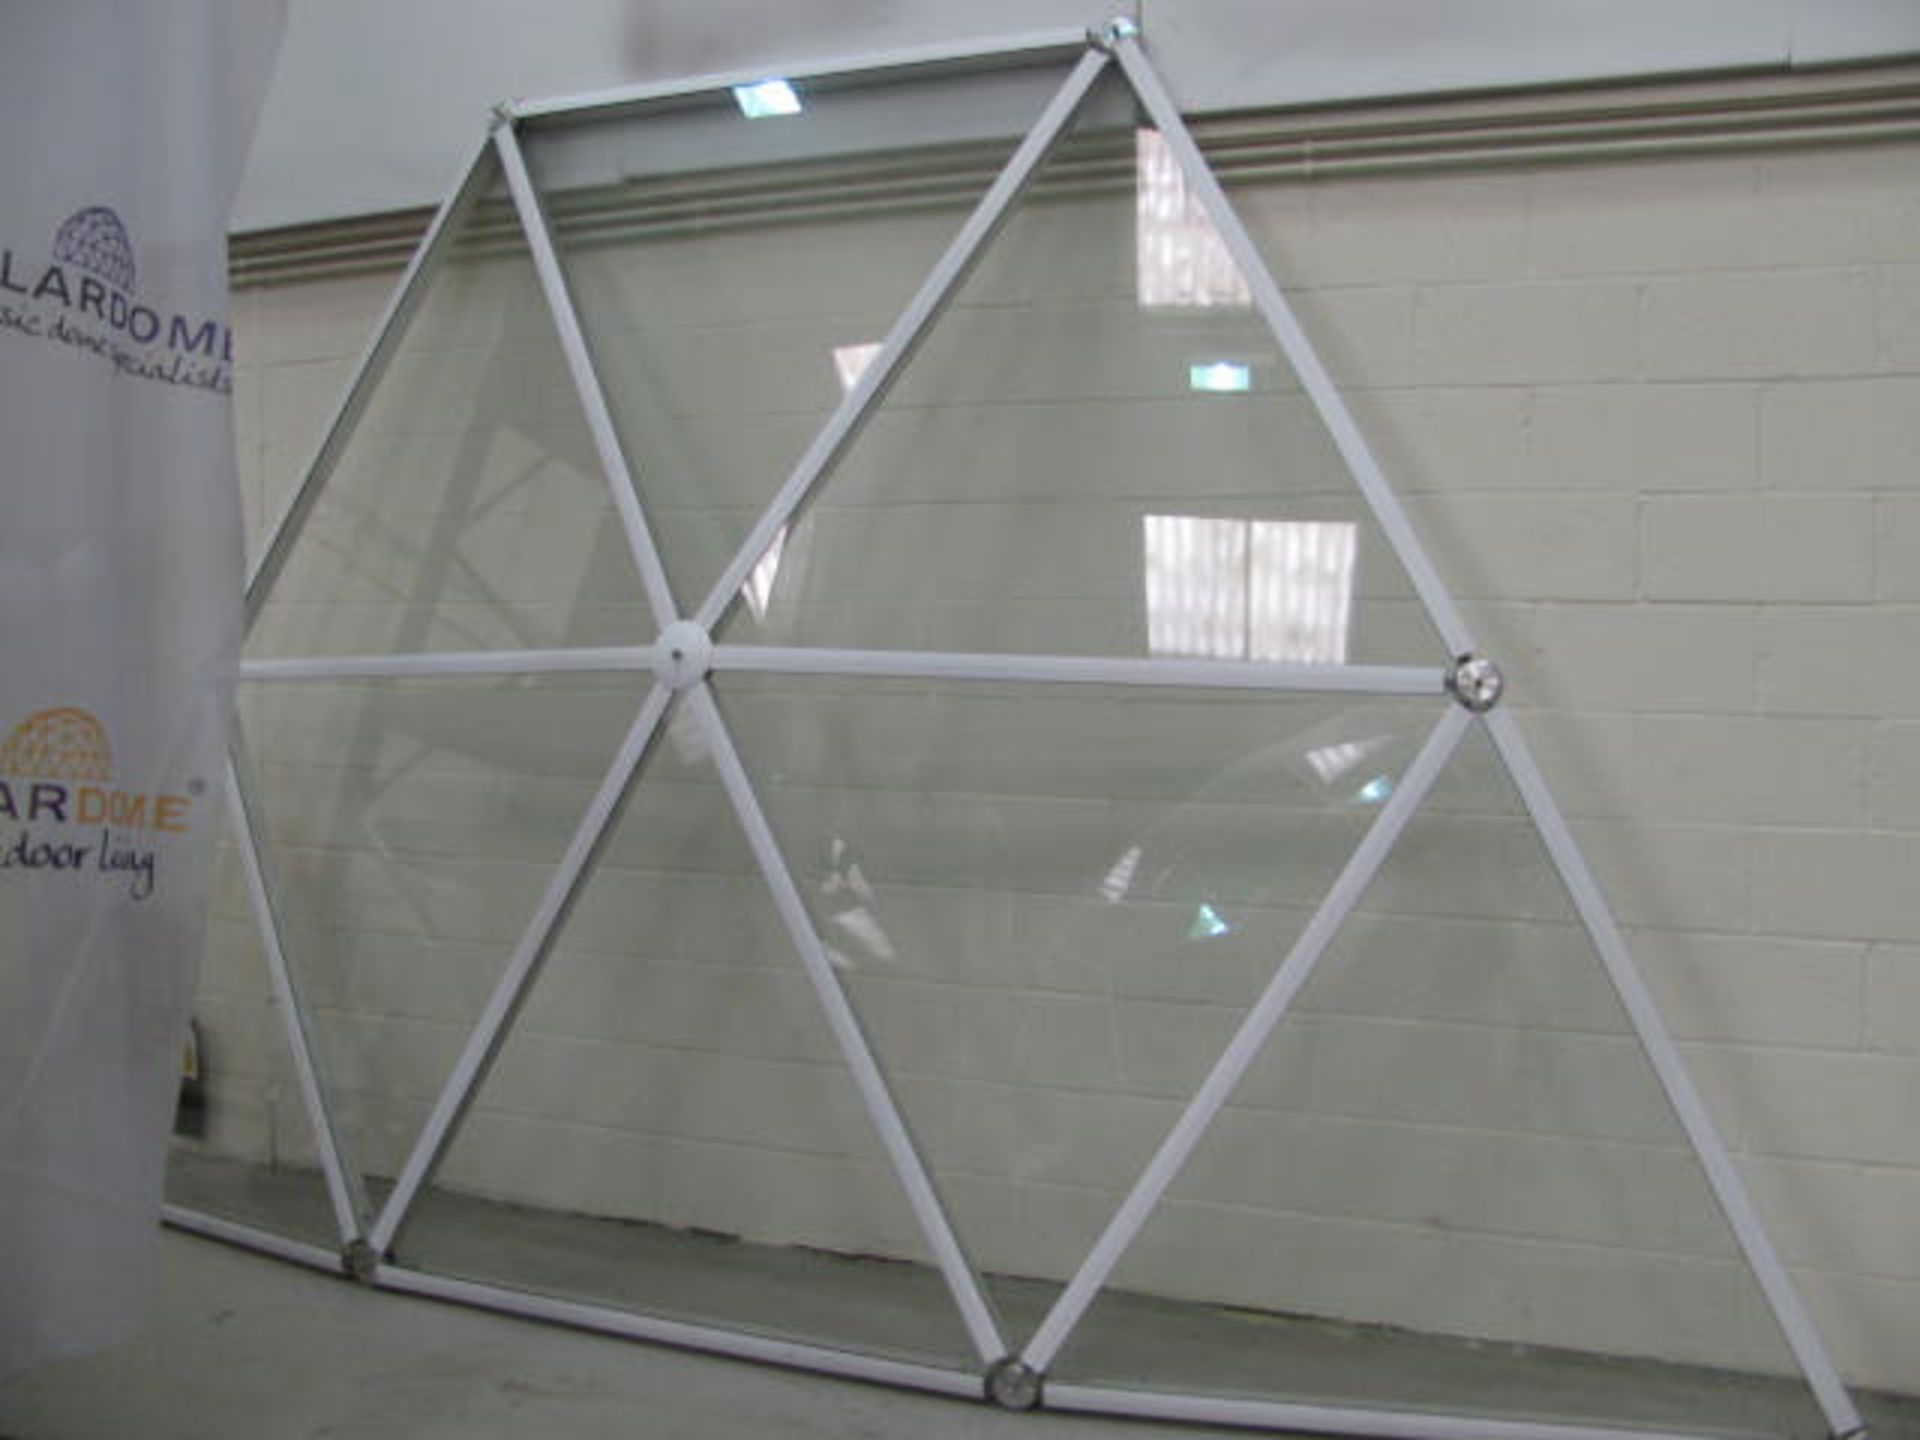 Double glazed dome entrance sample togeter with double glazed roof section - Image 7 of 7